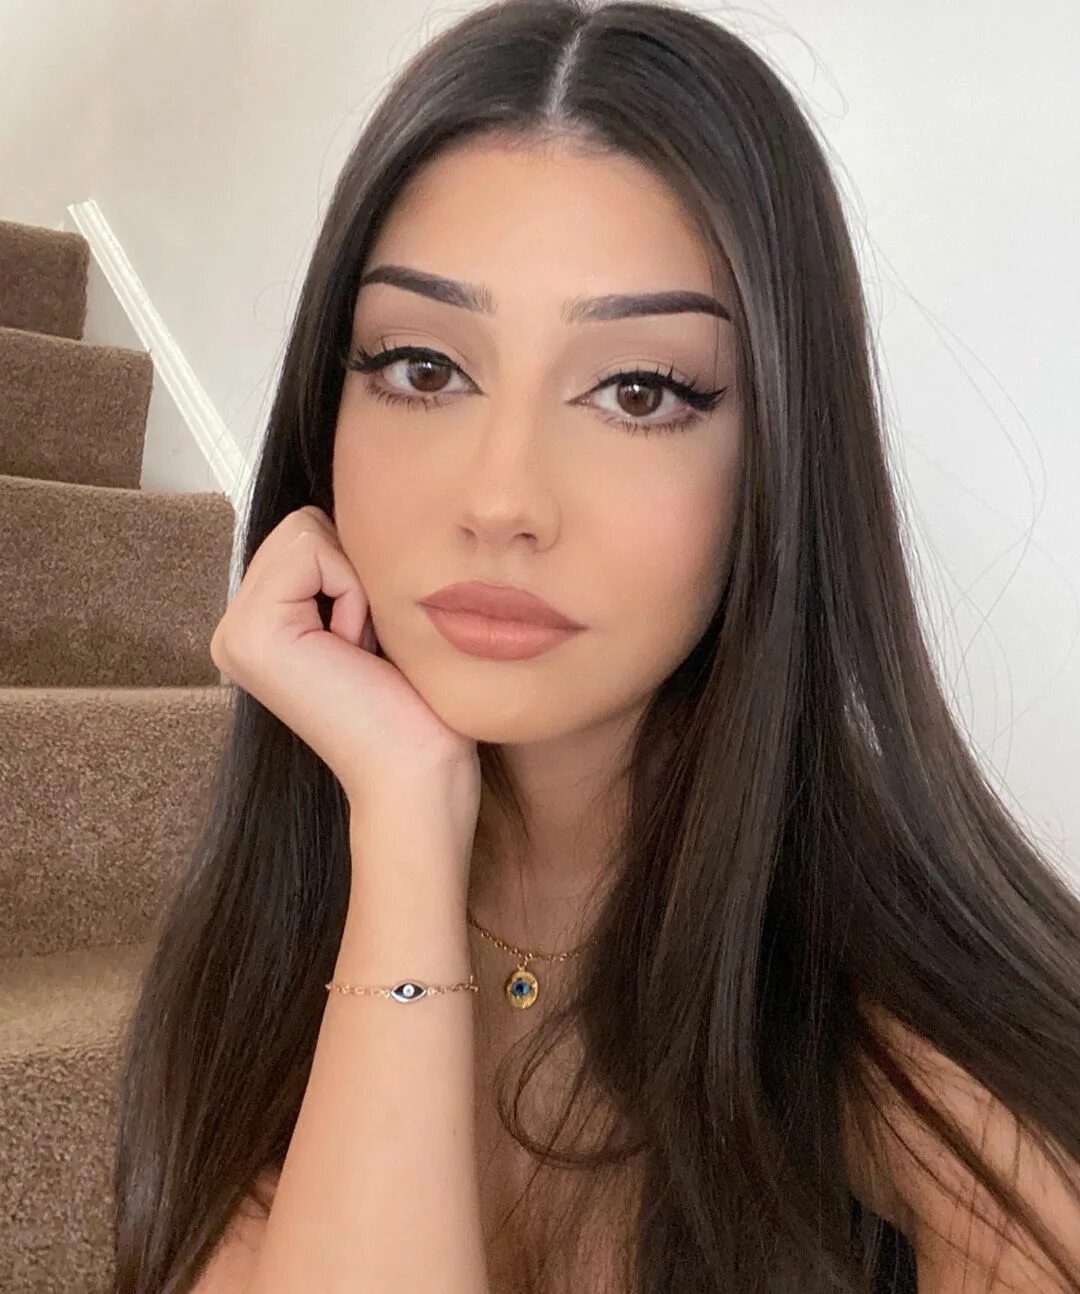 Shirin on Instagram: "she said 🧿 👄 🧿 this time" .